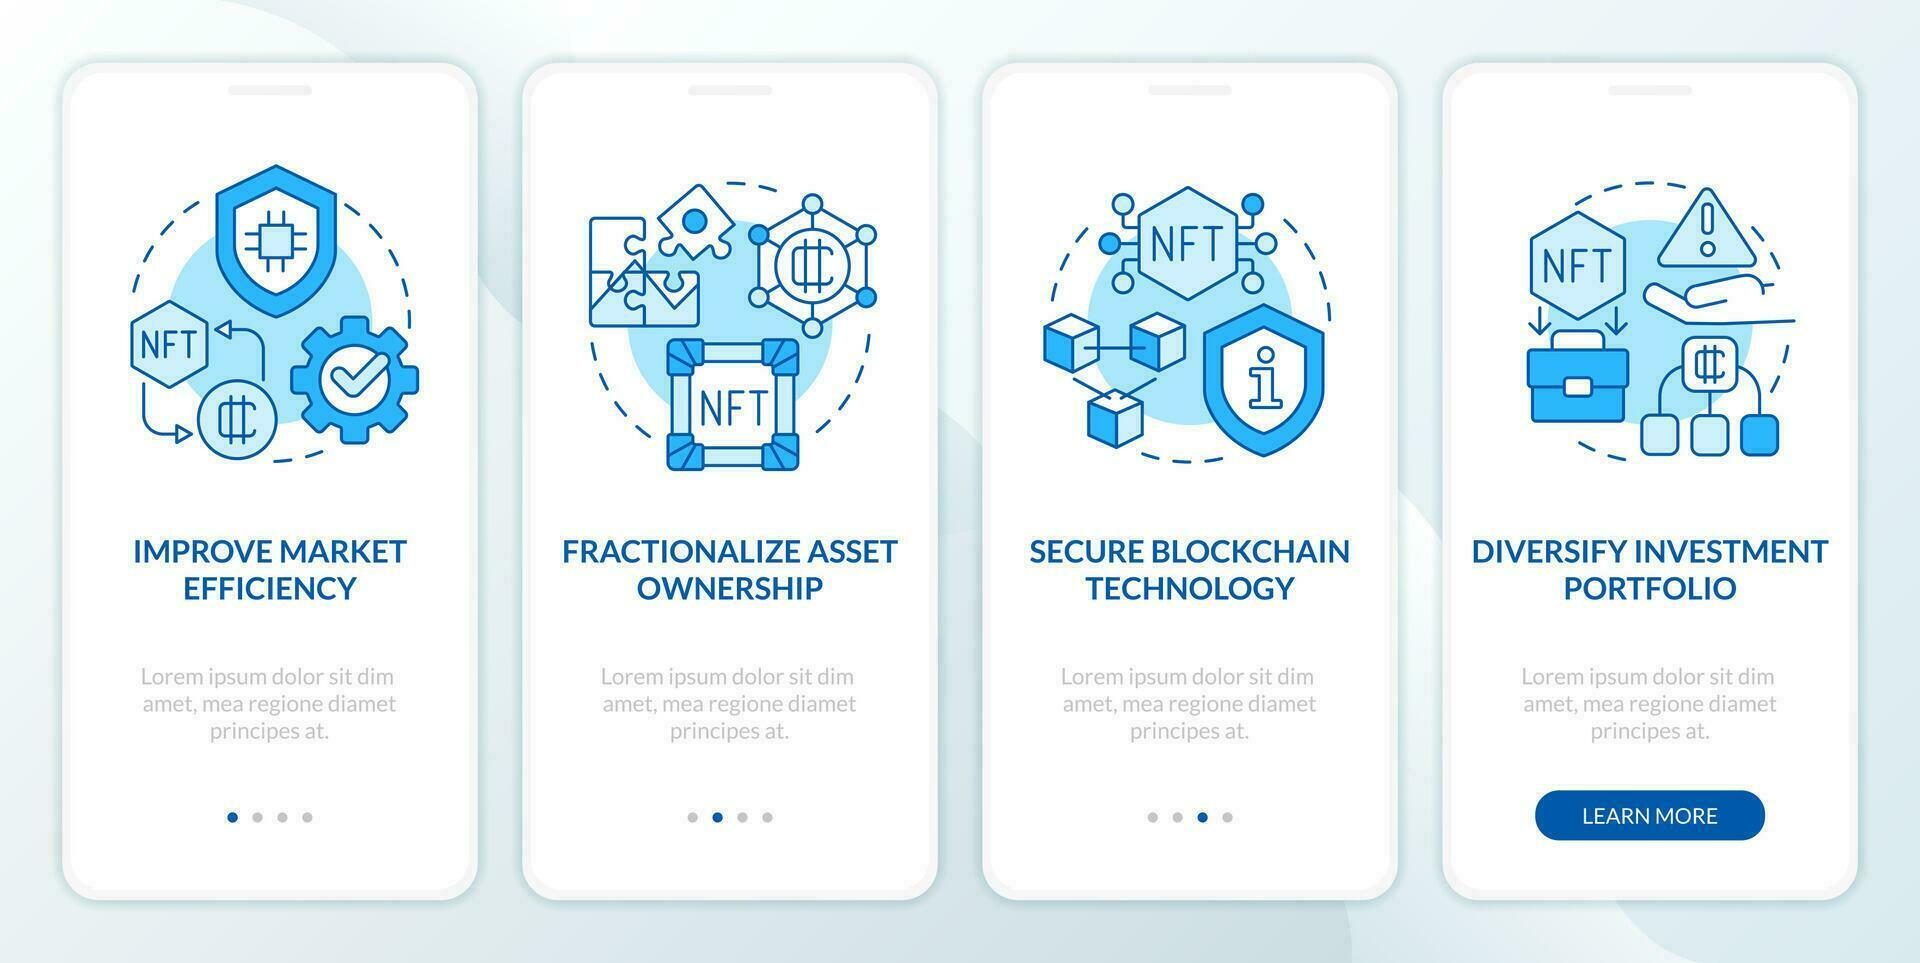 NFT benefits blue onboarding mobile app screen. Digital artworks walkthrough 4 steps editable graphic instructions with linear concepts. UI, UX, GUI template vector